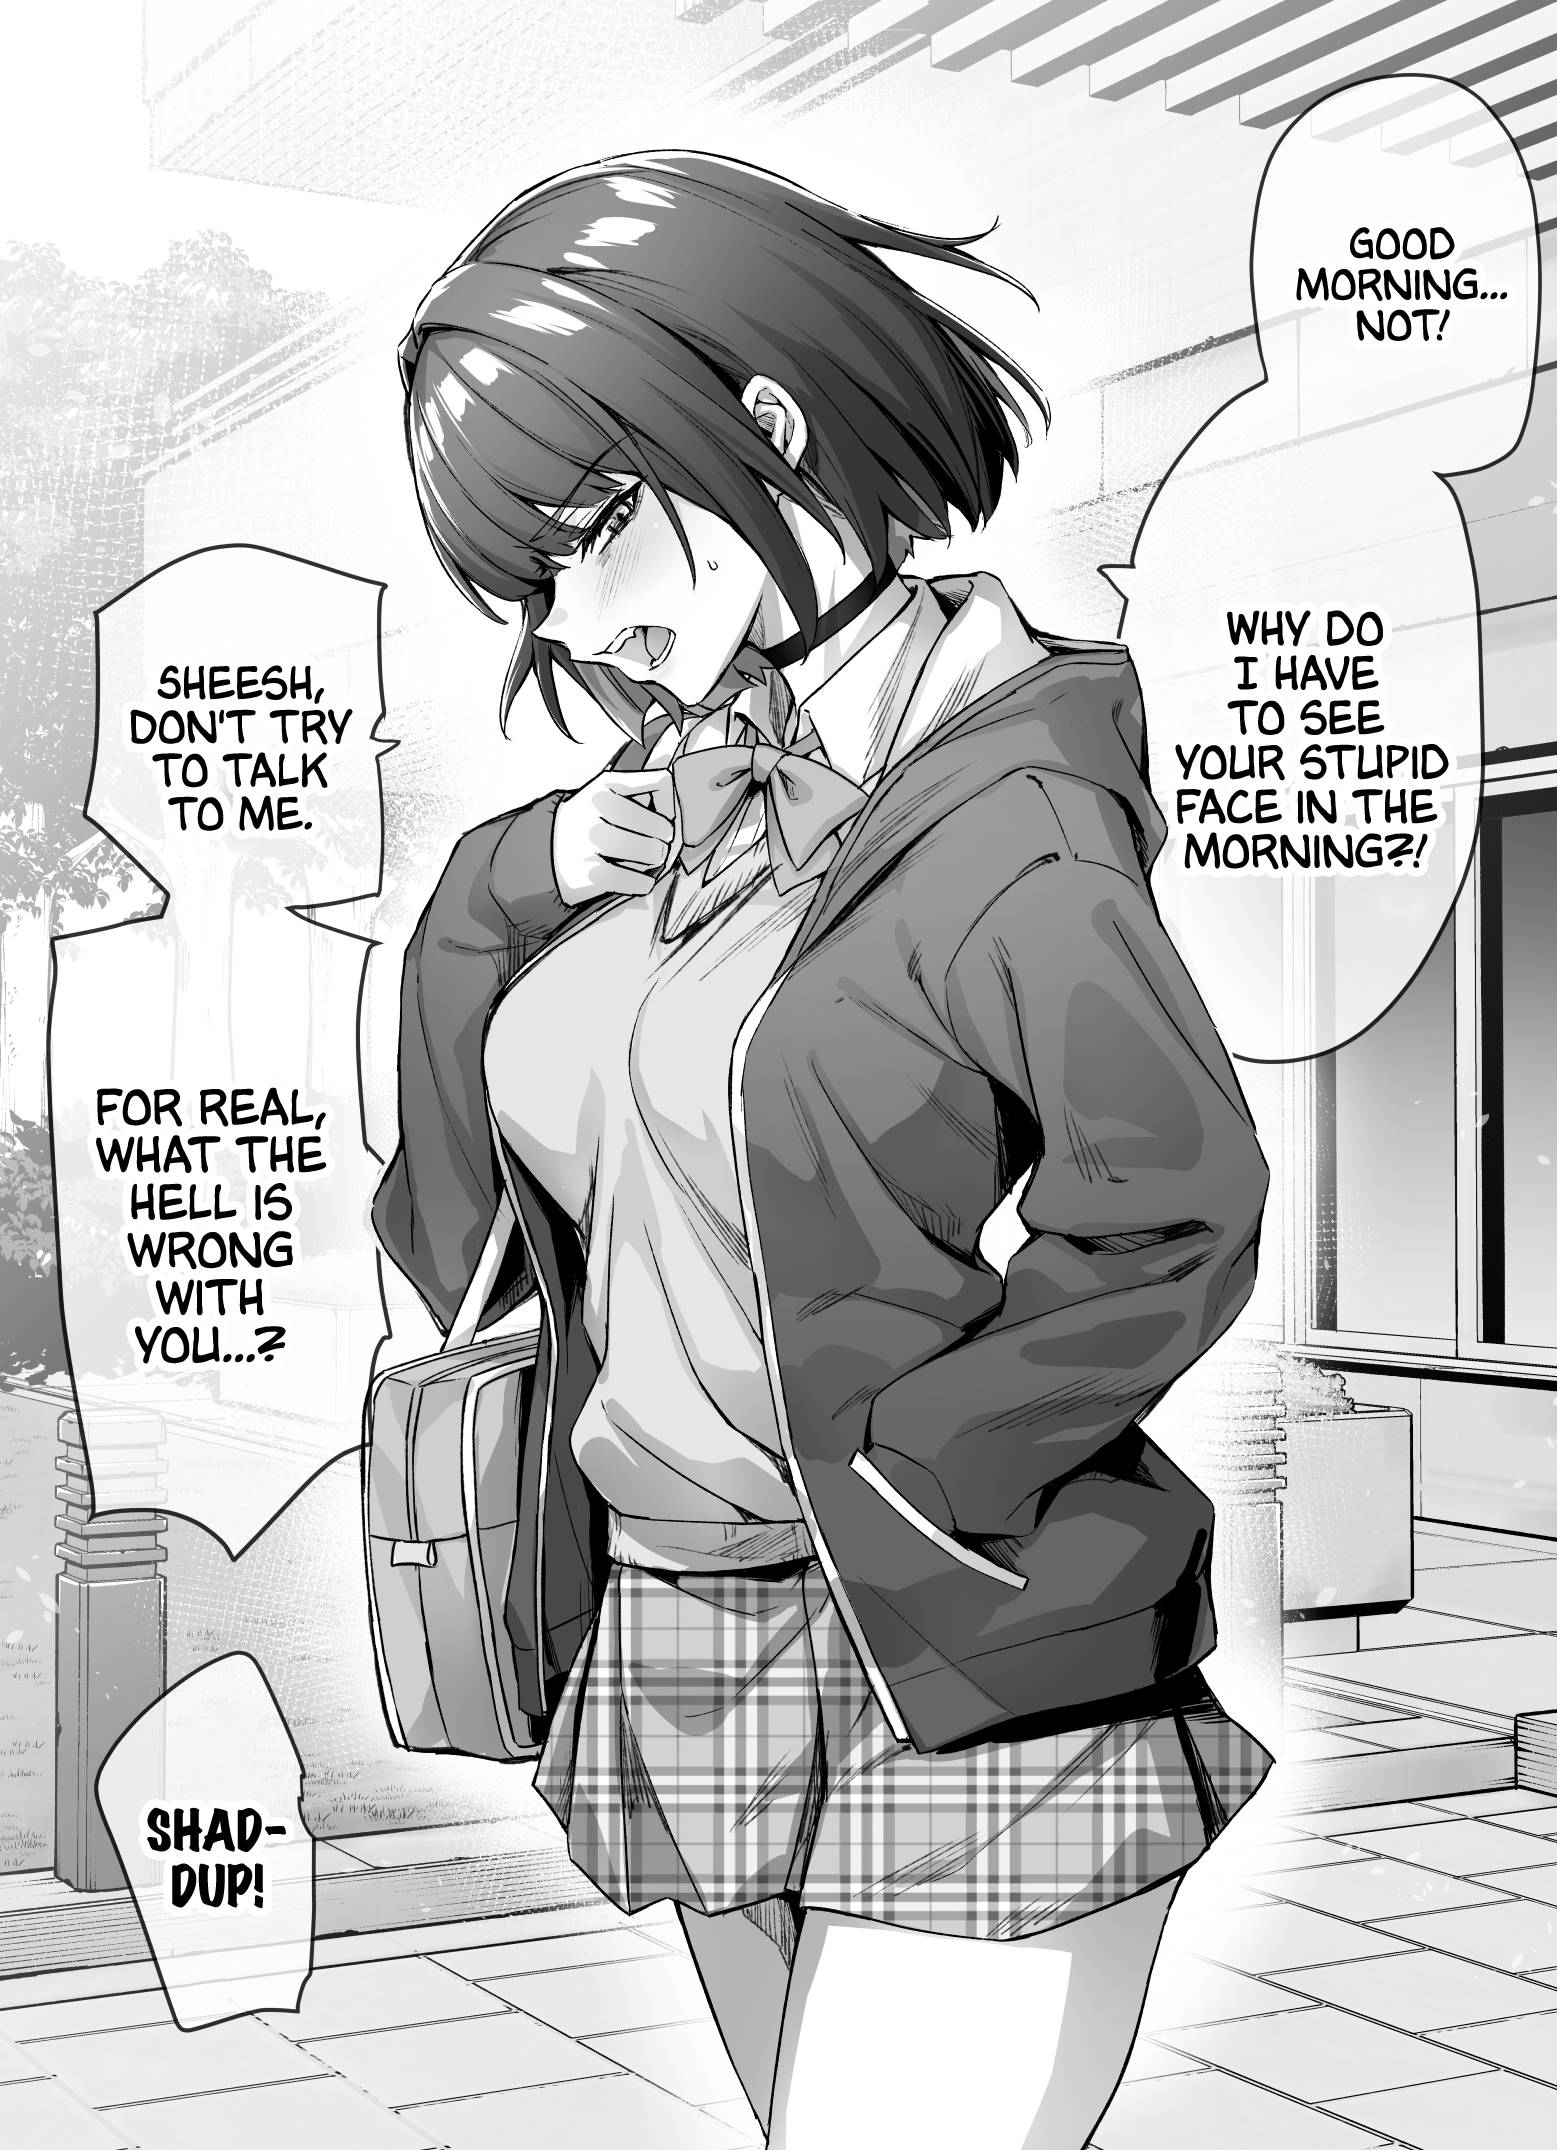 The Tsuntsuntsuntsuntsuntsuntsuntsuntsuntsuntsundere Girl Getting Less and Less Tsun Day by Day - chapter 7 - #1